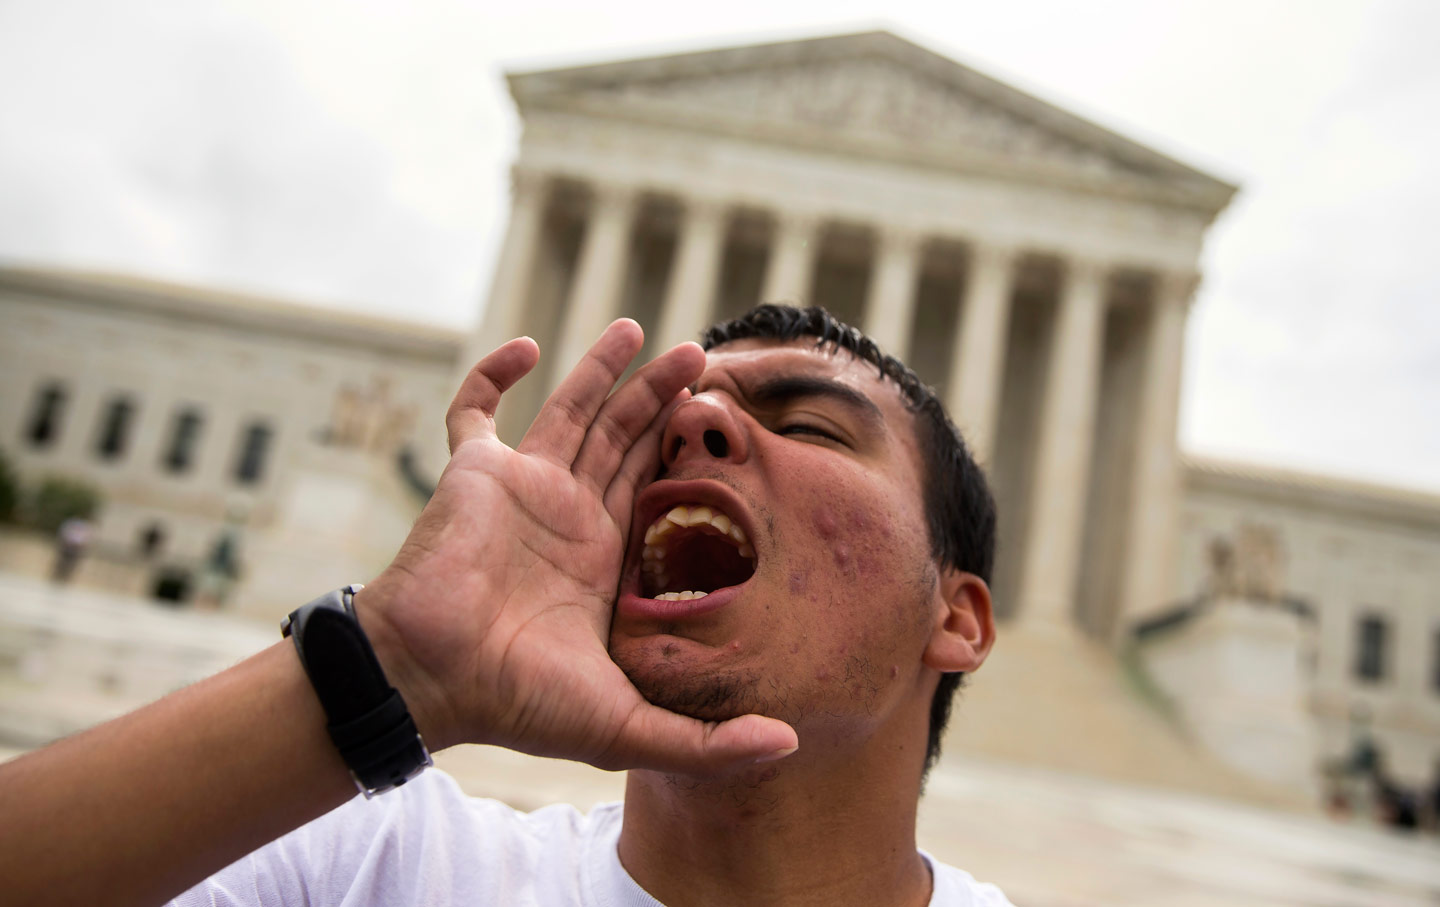 A young man yells during a demonstration at the Supreme Court